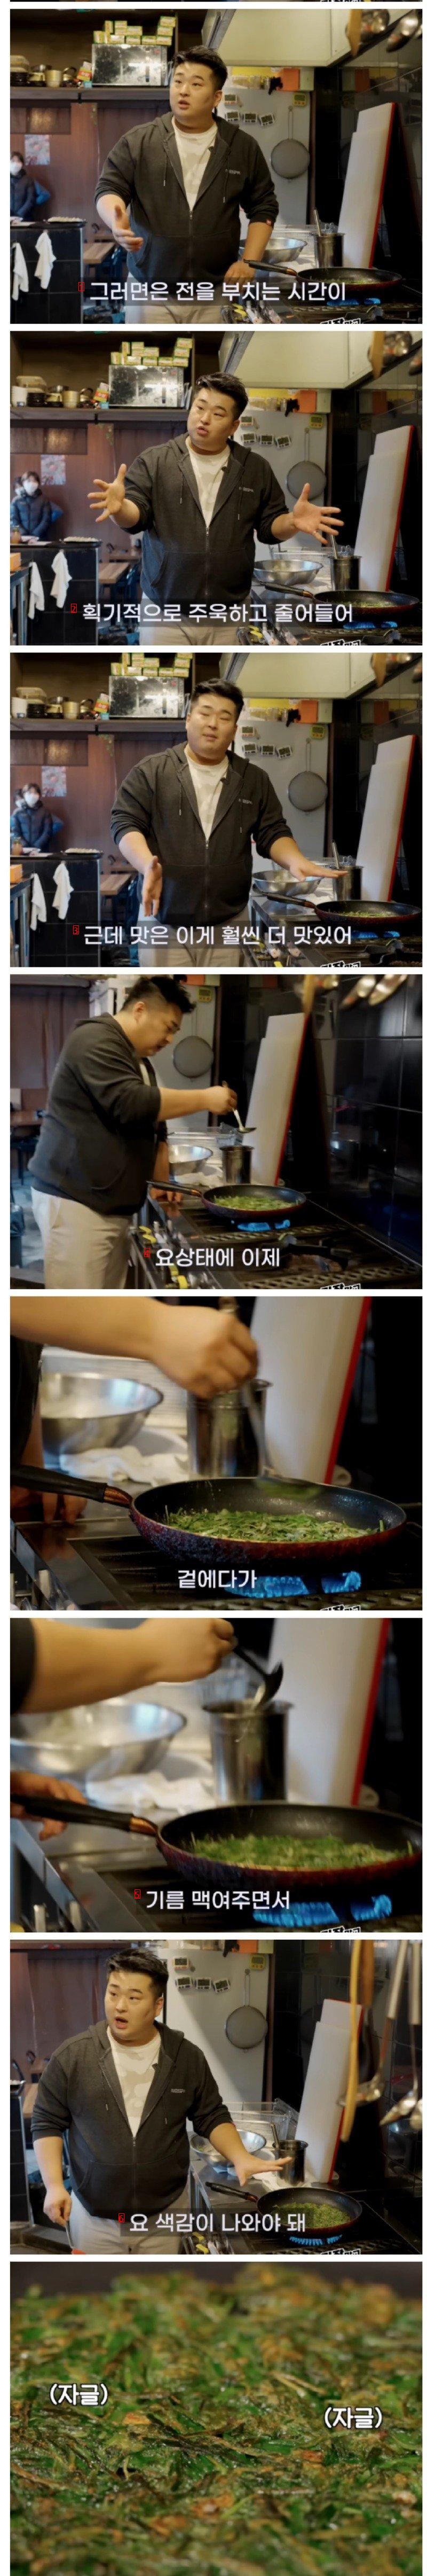 Chef Lee Wonil says there should be no water in the dough when frying.jpg